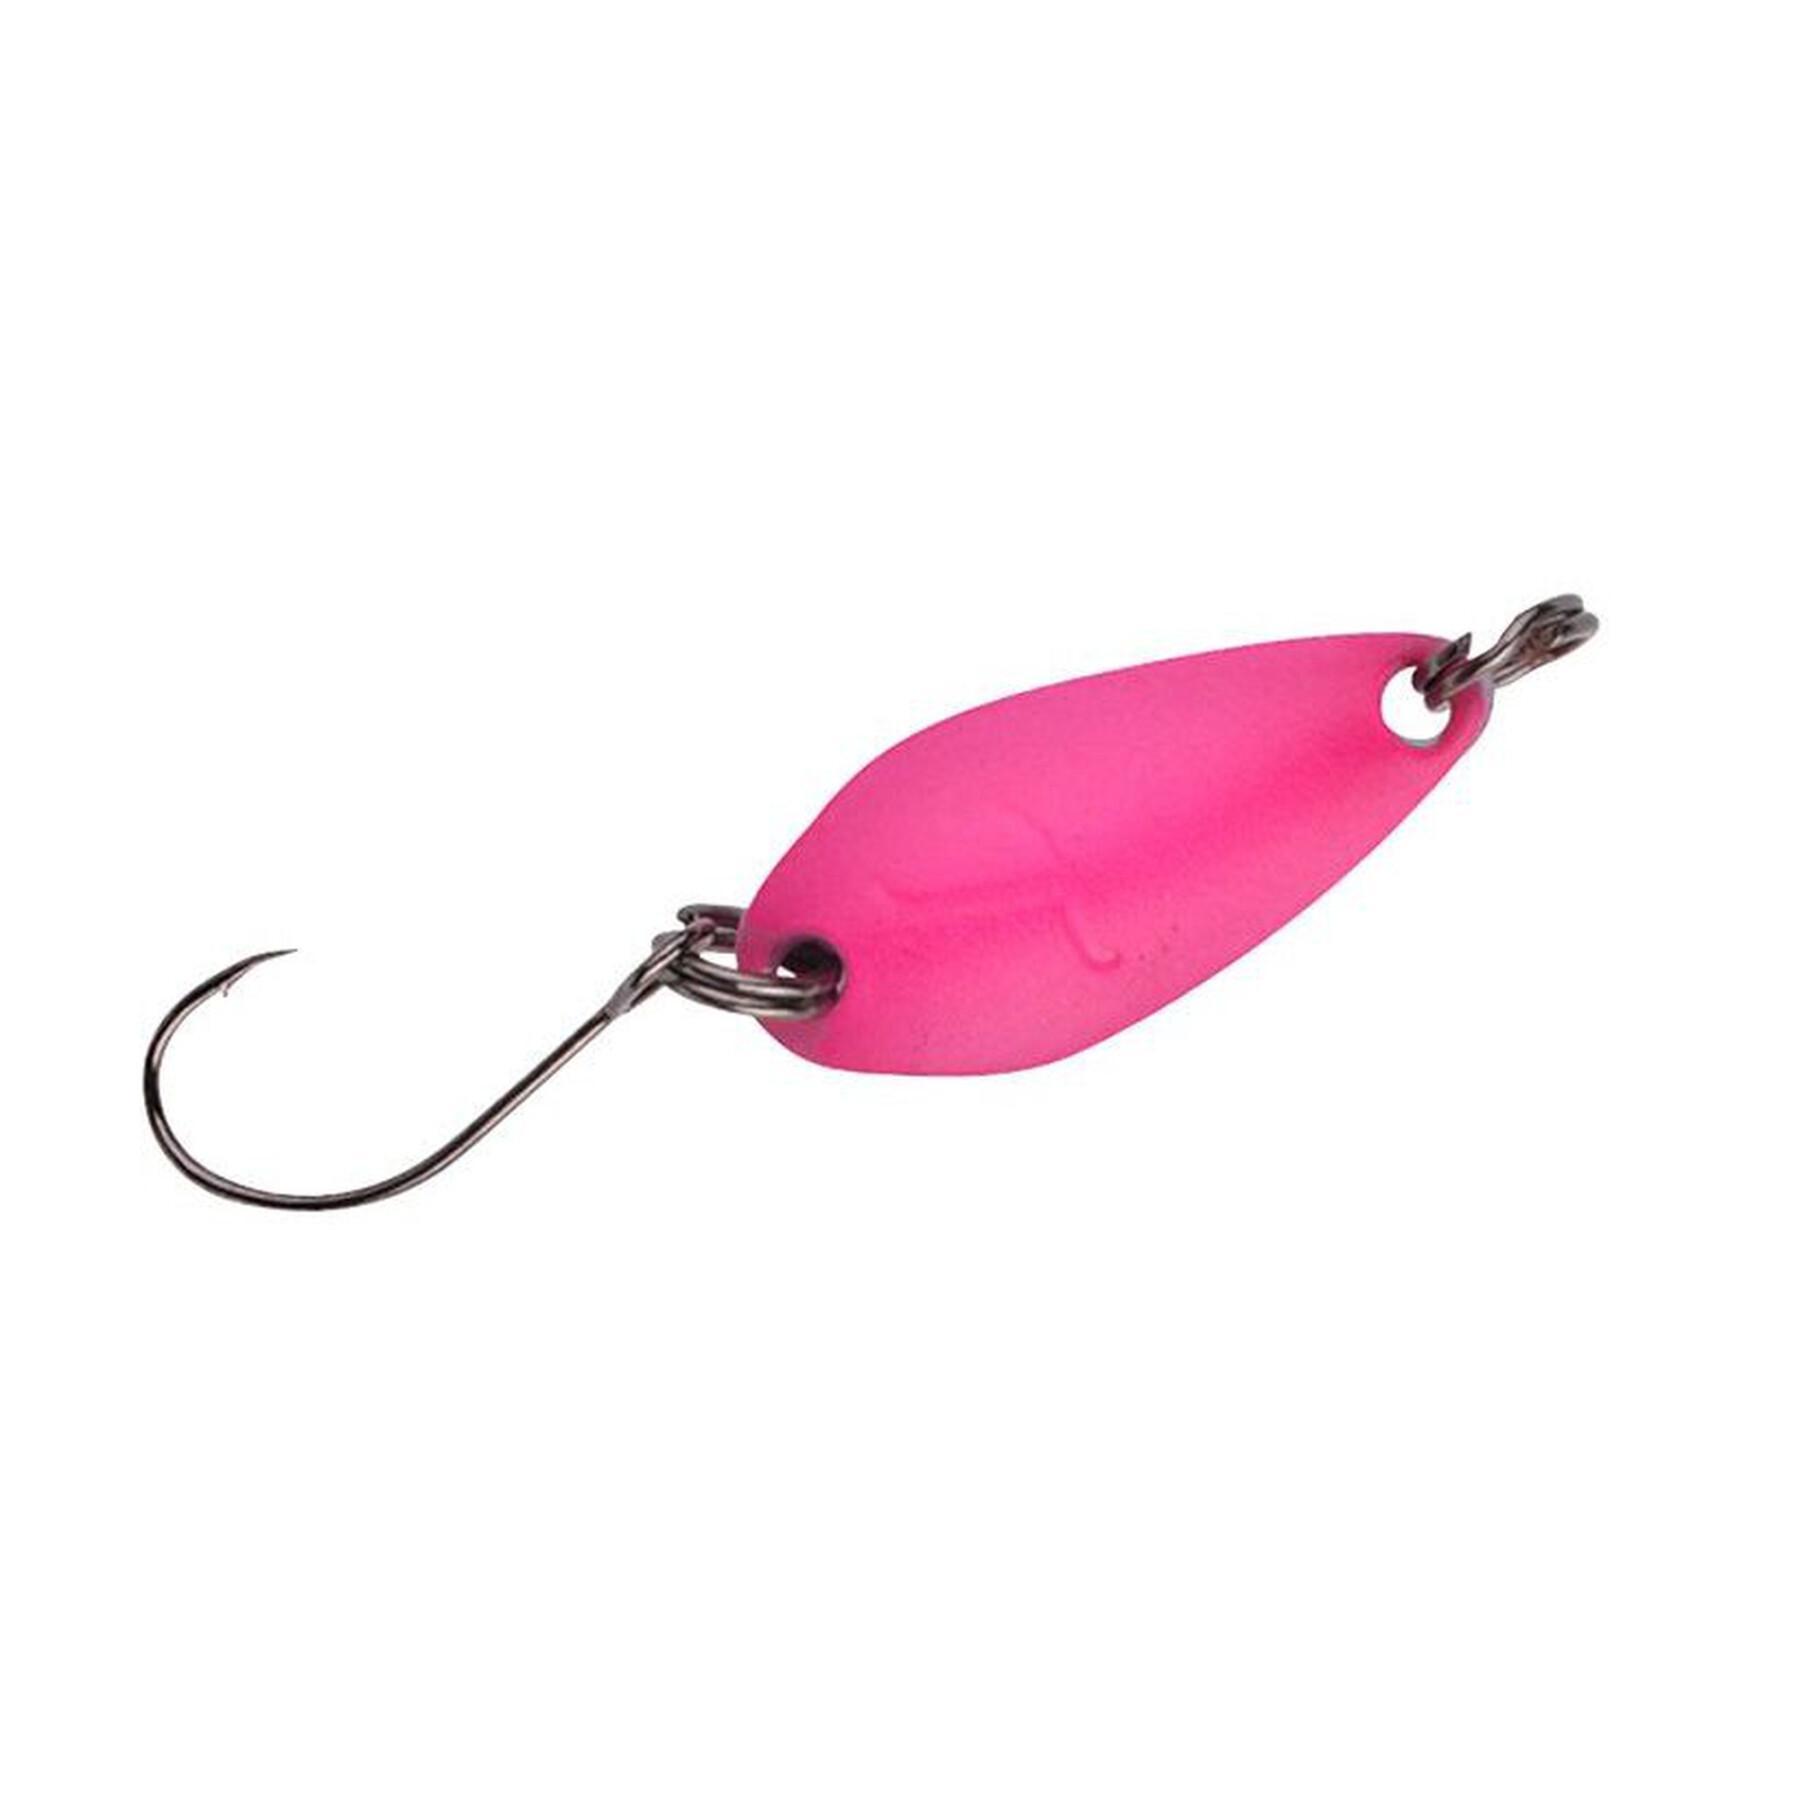 Lure Spro Trout Master Incy Spoon - Best Brands - Fishing